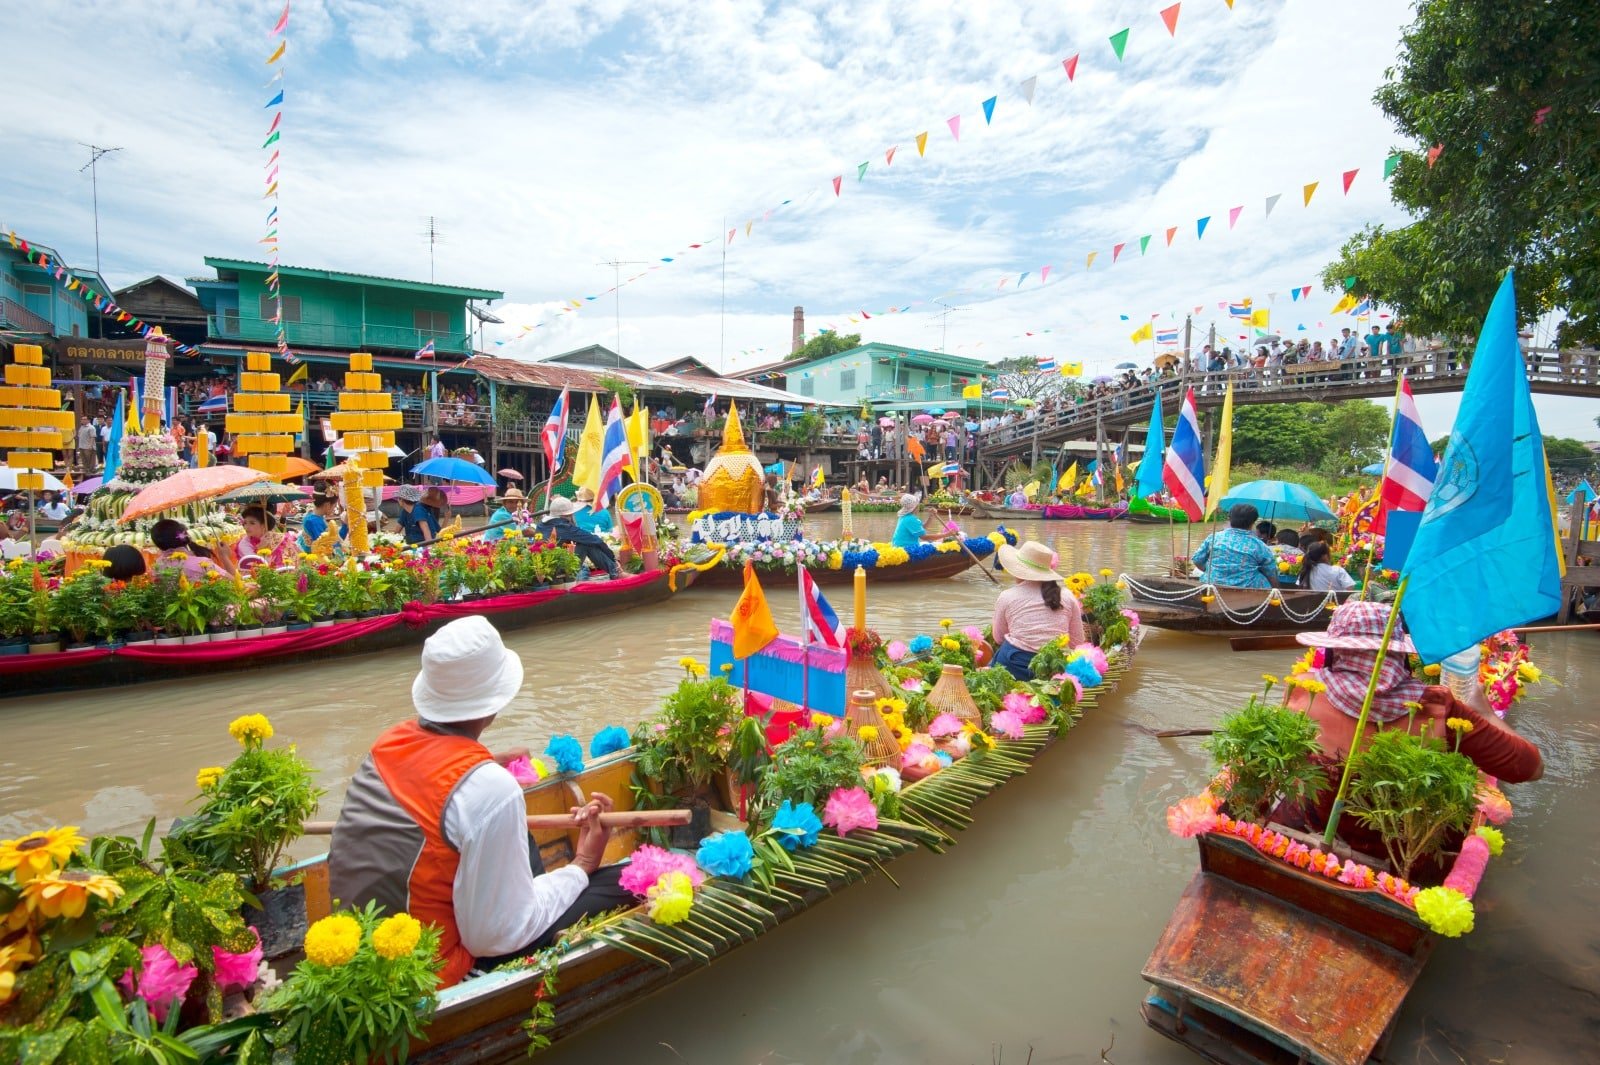 <p><span>The floating markets near Bangkok, such as Damnoen Saduak and Amphawa, offer a vibrant and colorful glimpse into traditional Thai life. These bustling waterways, lined with boats laden with fresh produce, local delicacies, and handicrafts, present a lively and picturesque scene.</span></p> <p><span>A visit to these markets is a sensory experience, with the sights, sounds, and smells of authentic Thai commerce and cuisine. Damnoen Saduak, the most famous of these markets, provides a more tourist-focused experience, while Amphawa offers a more local atmosphere and is primarily known for its evening seafood vendors.</span></p> <p><span>Exploring these floating markets by boat or along the canalside walkways is a unique way to experience the local culture and indulge in some of Thailand’s most delicious foods and charming souvenirs.</span></p> <p><b>Insider’s Tip: </b><span>Take a boat tour to fully experience the market and try local snacks from the floating vendors.</span></p> <p><b>How To Get There: </b><span>The floating markets are accessible by bus or organized tours from Bangkok.</span></p> <p><b>Best Time To Travel: </b><span>Visit early in the morning to avoid the crowds and the heat.</span></p>